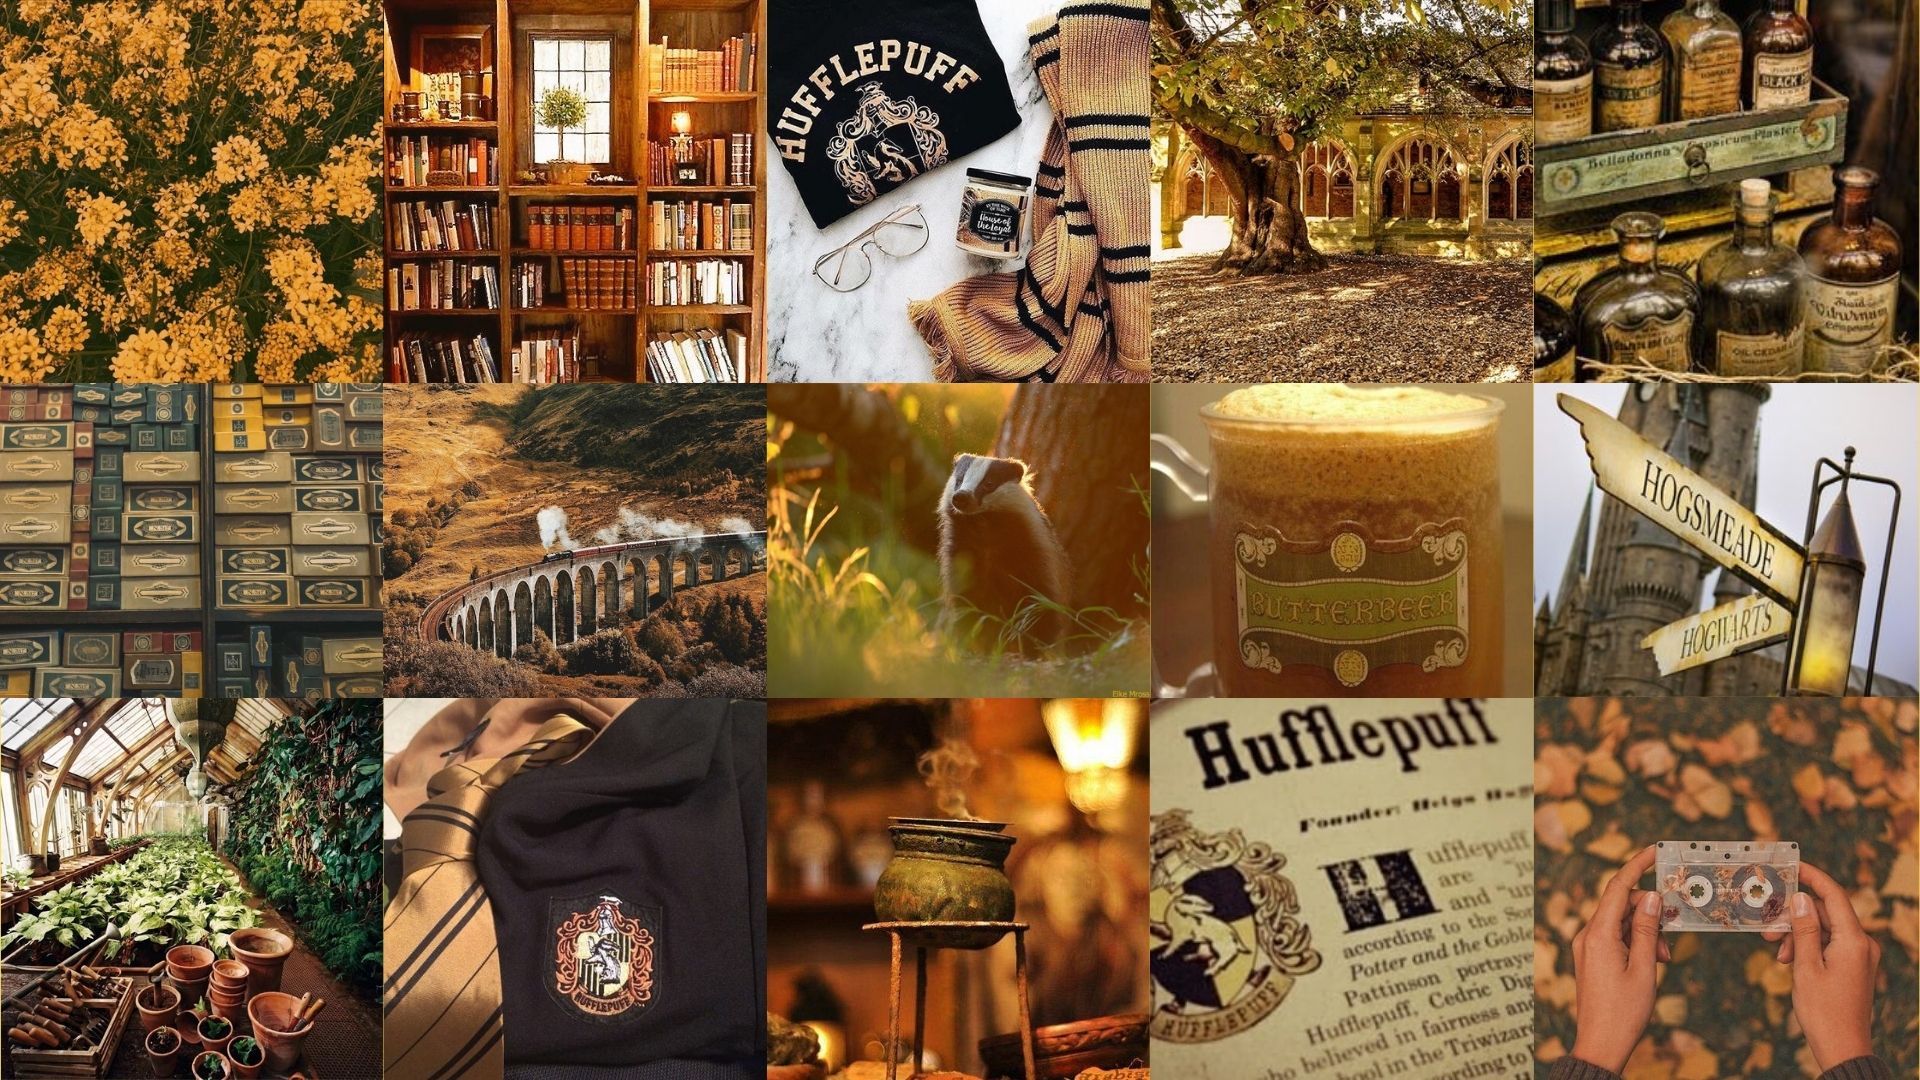 A collage of images related to the Harry Potter series, including bookshelves, a cup of tea, and a sign for Hufflepuff. - Hufflepuff